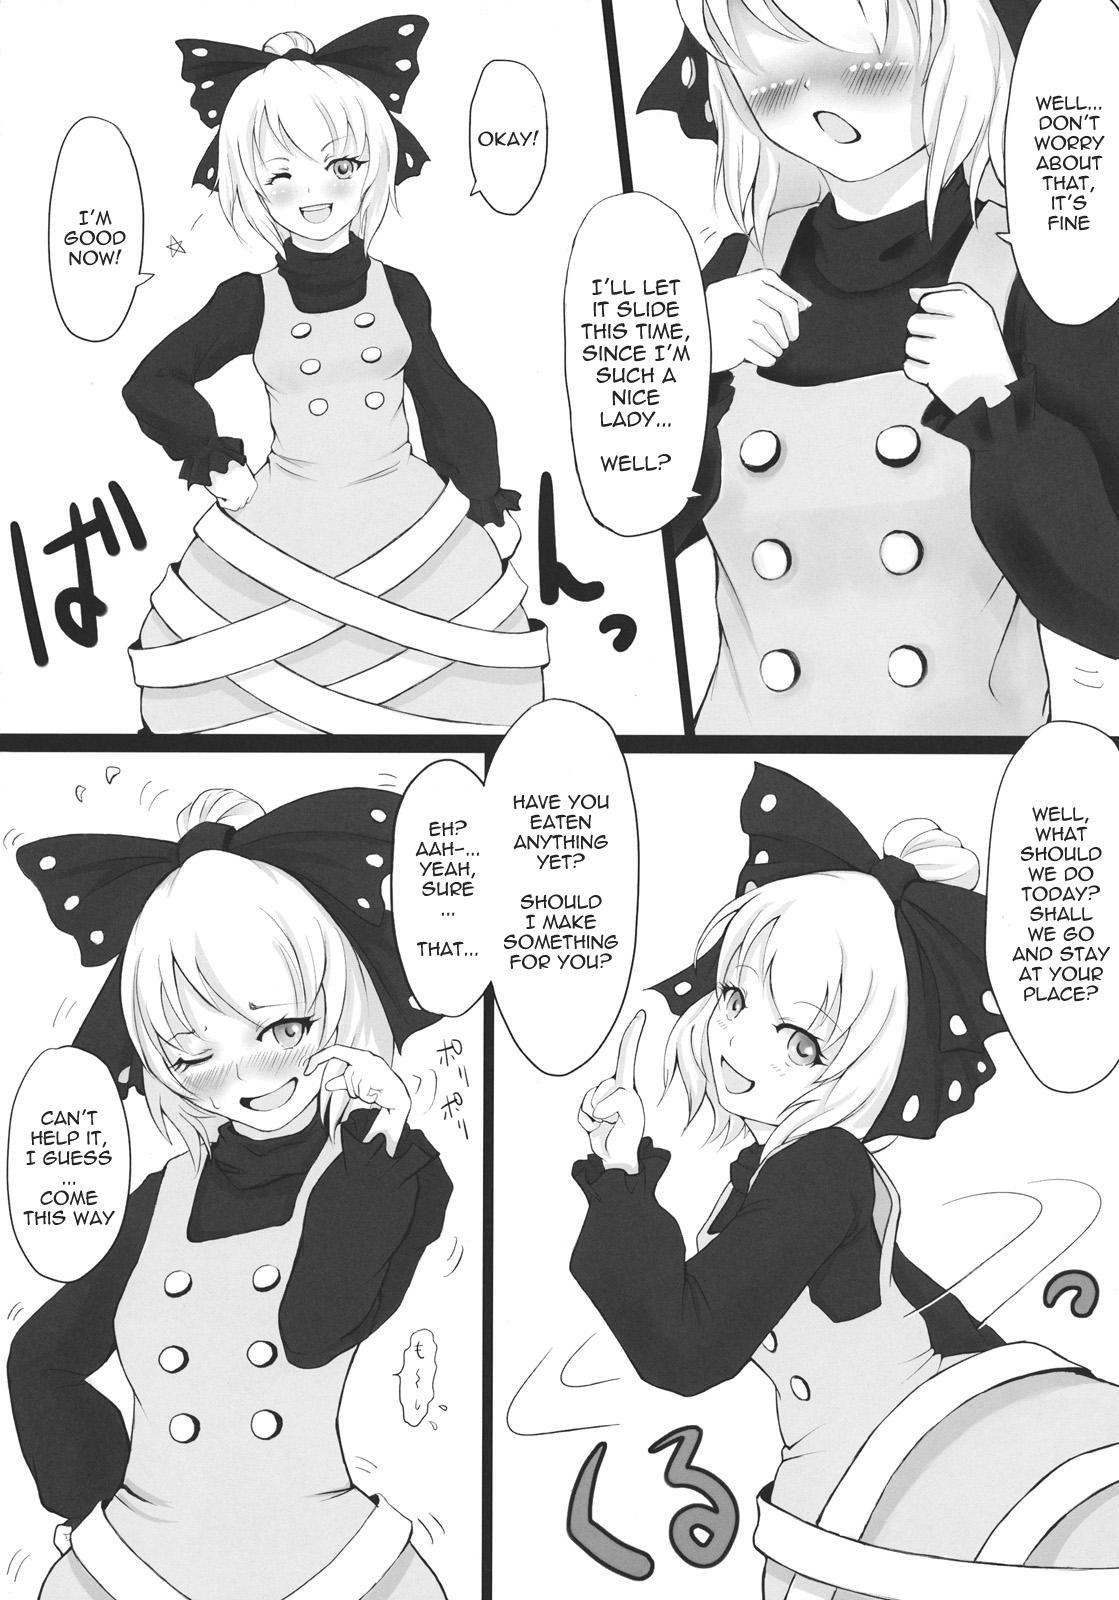 Real Amature Porn Trap - Touhou project Free 18 Year Old Porn - Page 5